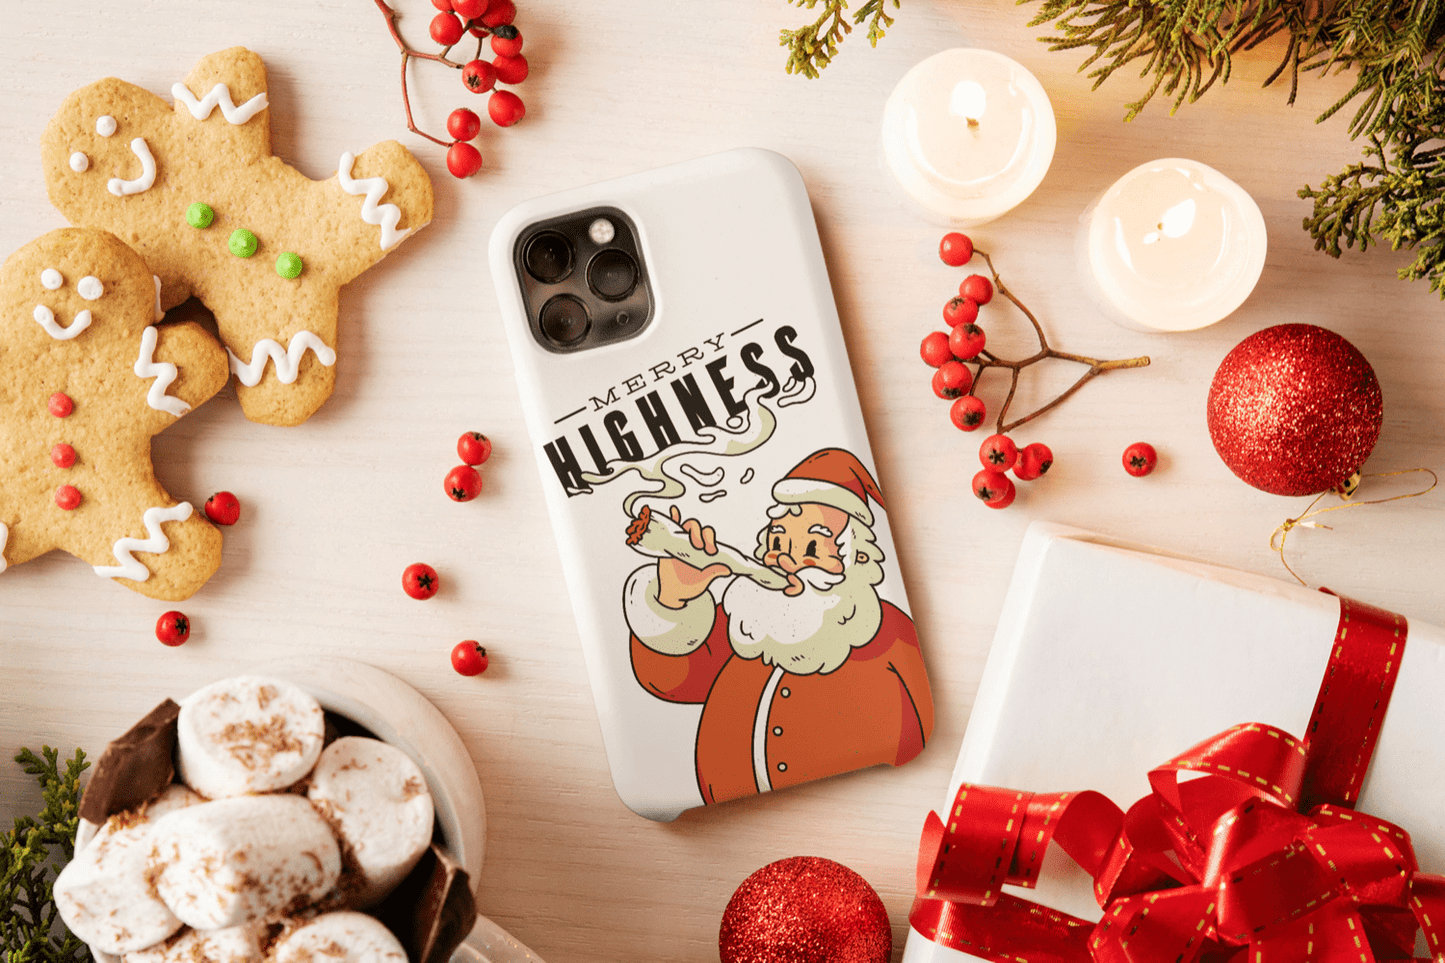 Galaxy Handyhülle - Merry Highness Santa mit Joint - SmartPhone Cover